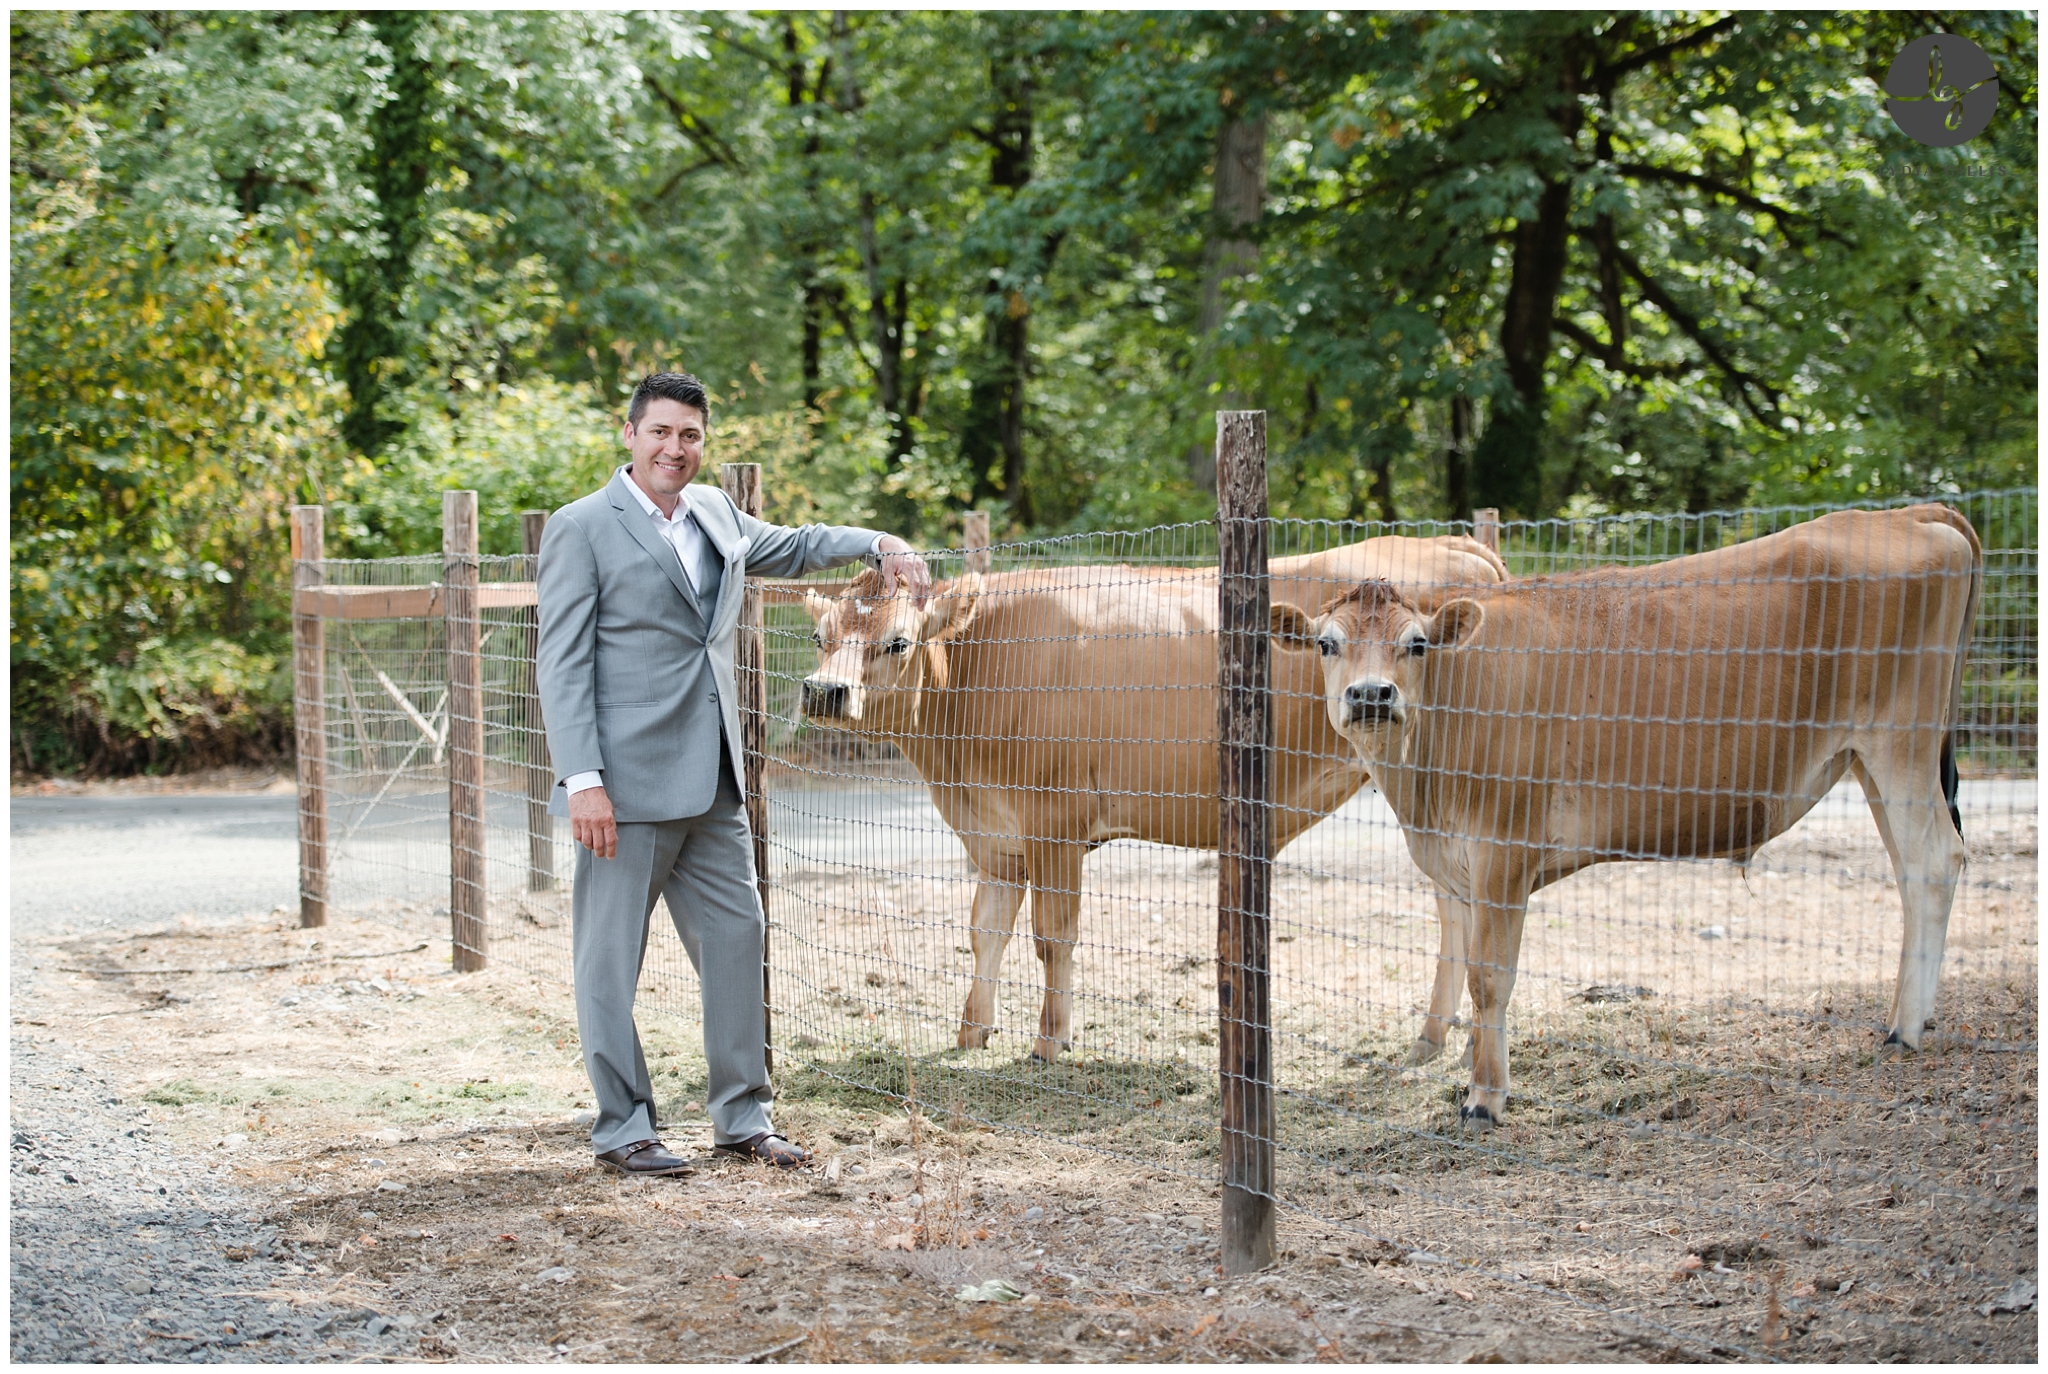 photos of groom in a gray suit with with cows in Eugene, Oregon. Photographed by Eugene wedding photography, Lydia Gillis Photography